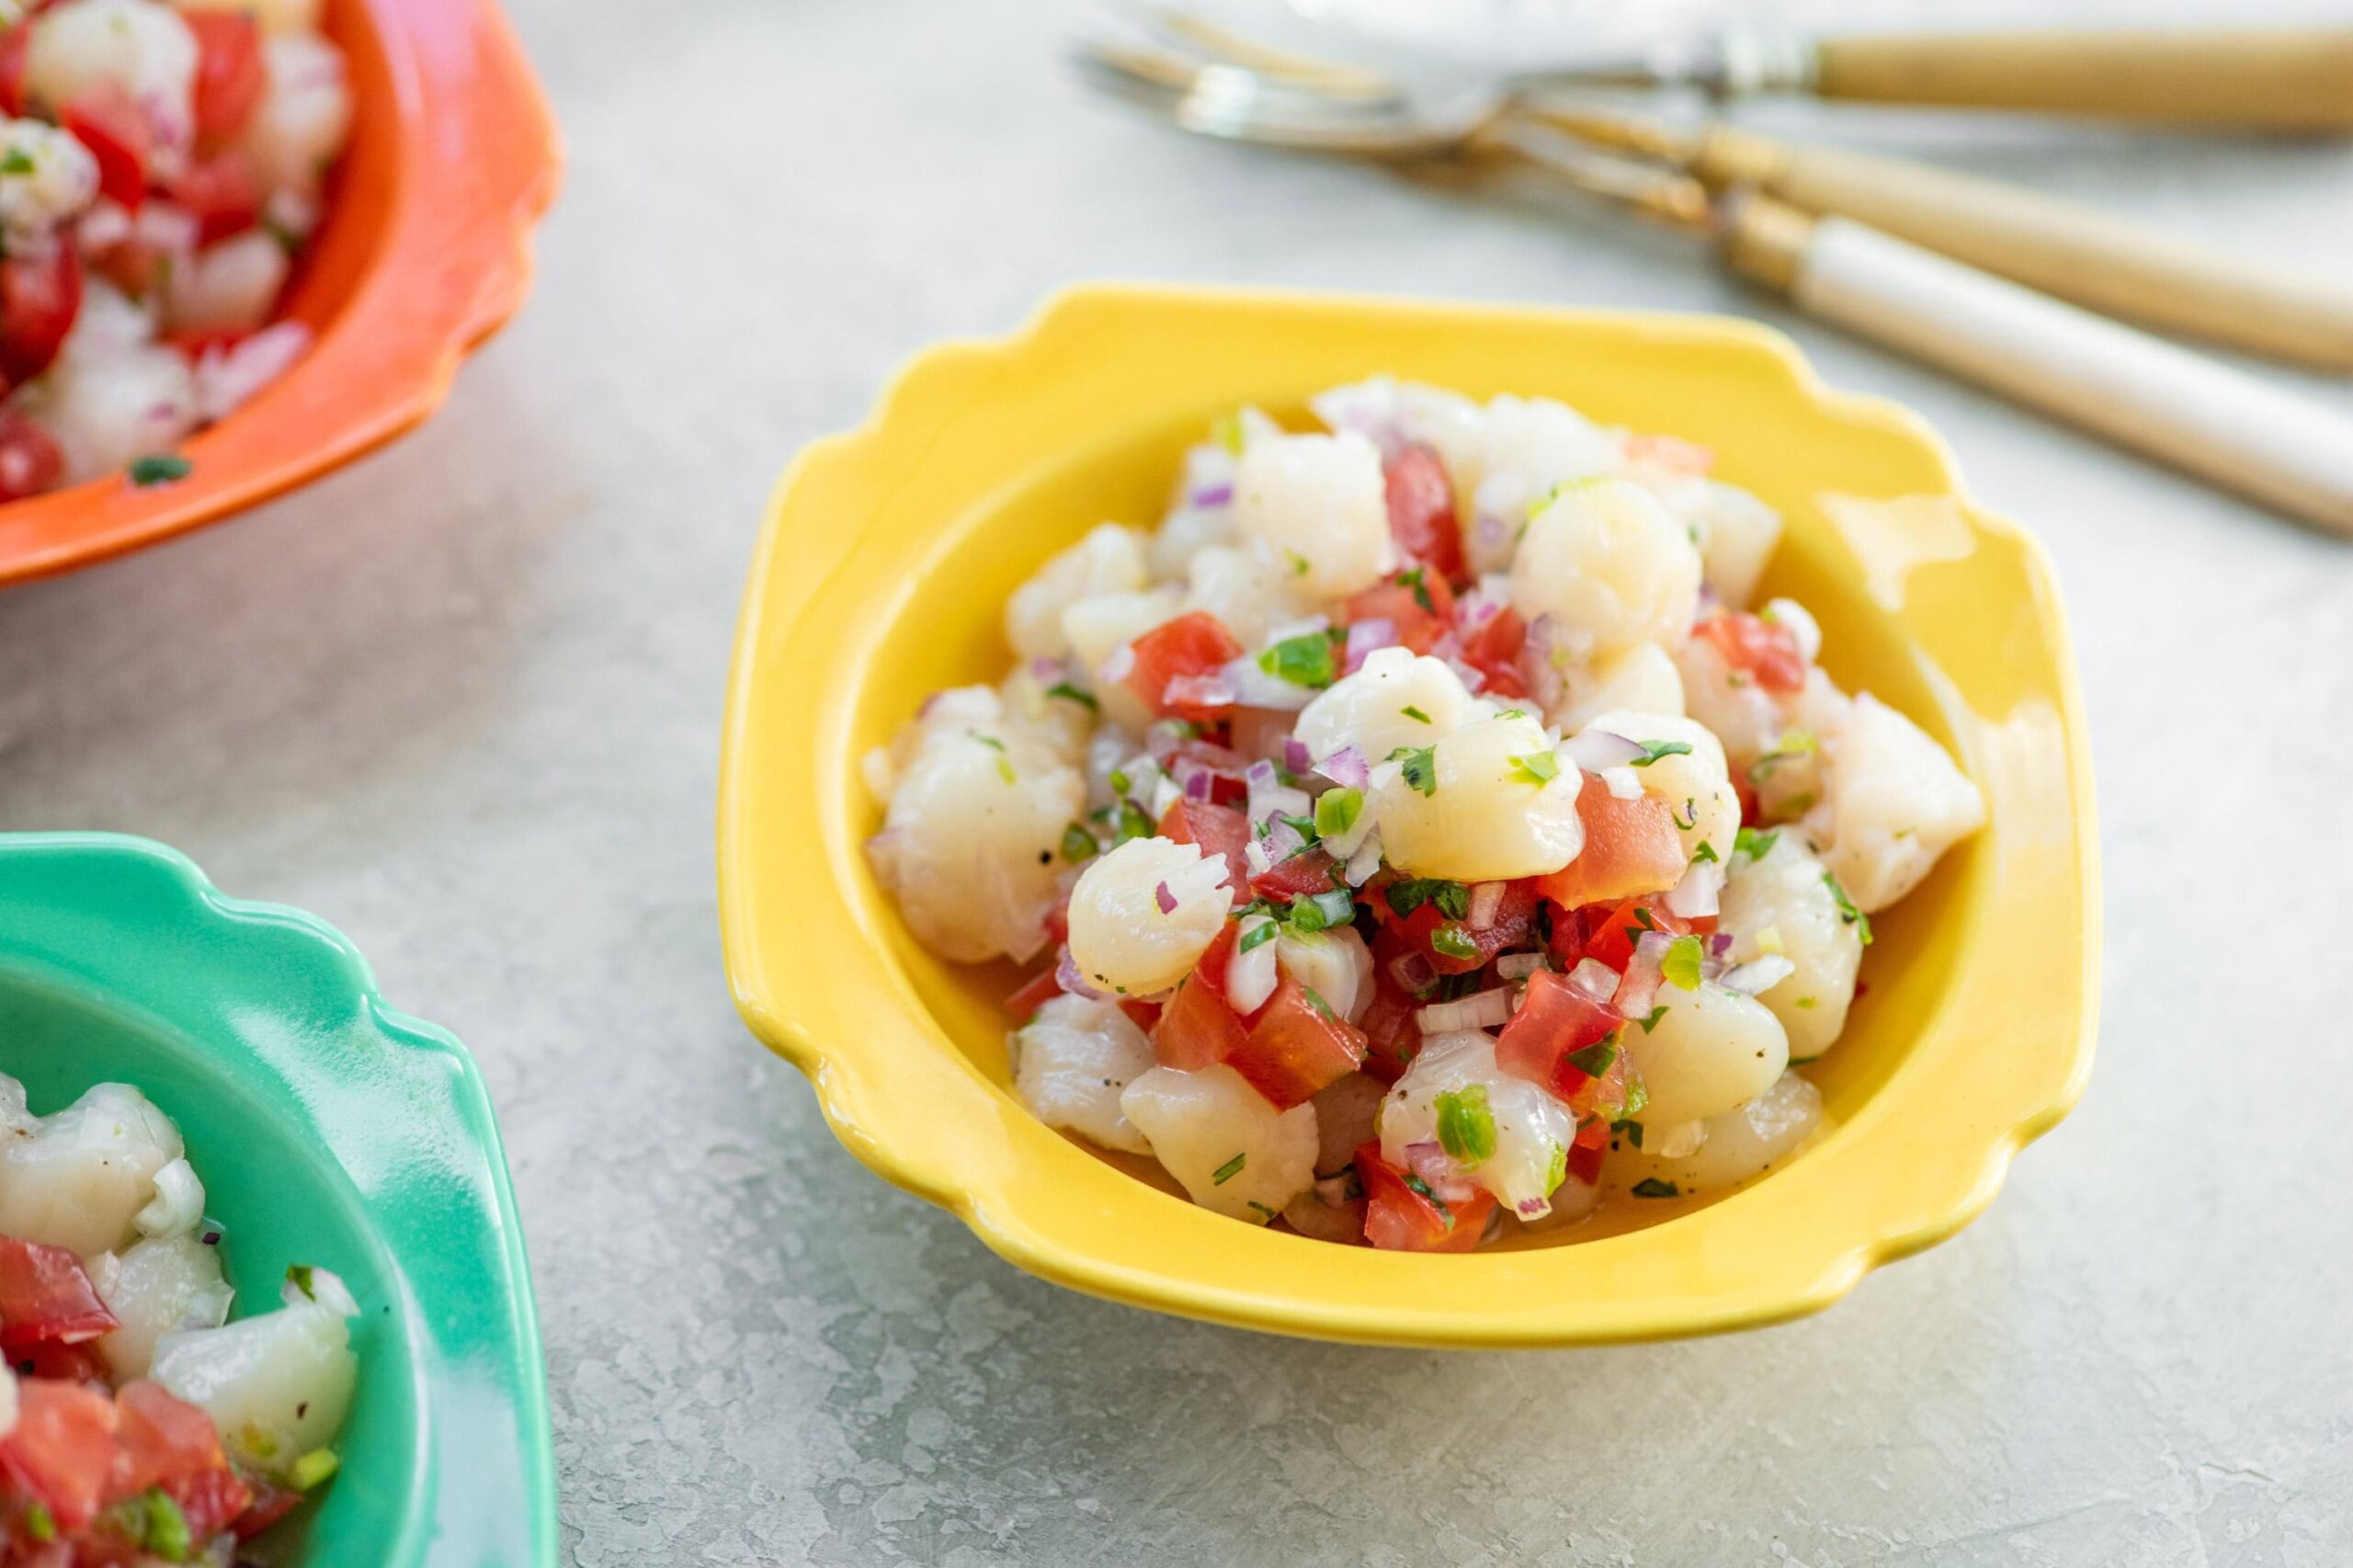 This scallop ceviche is a refreshing blend of flavors and textures that you're sure to love.